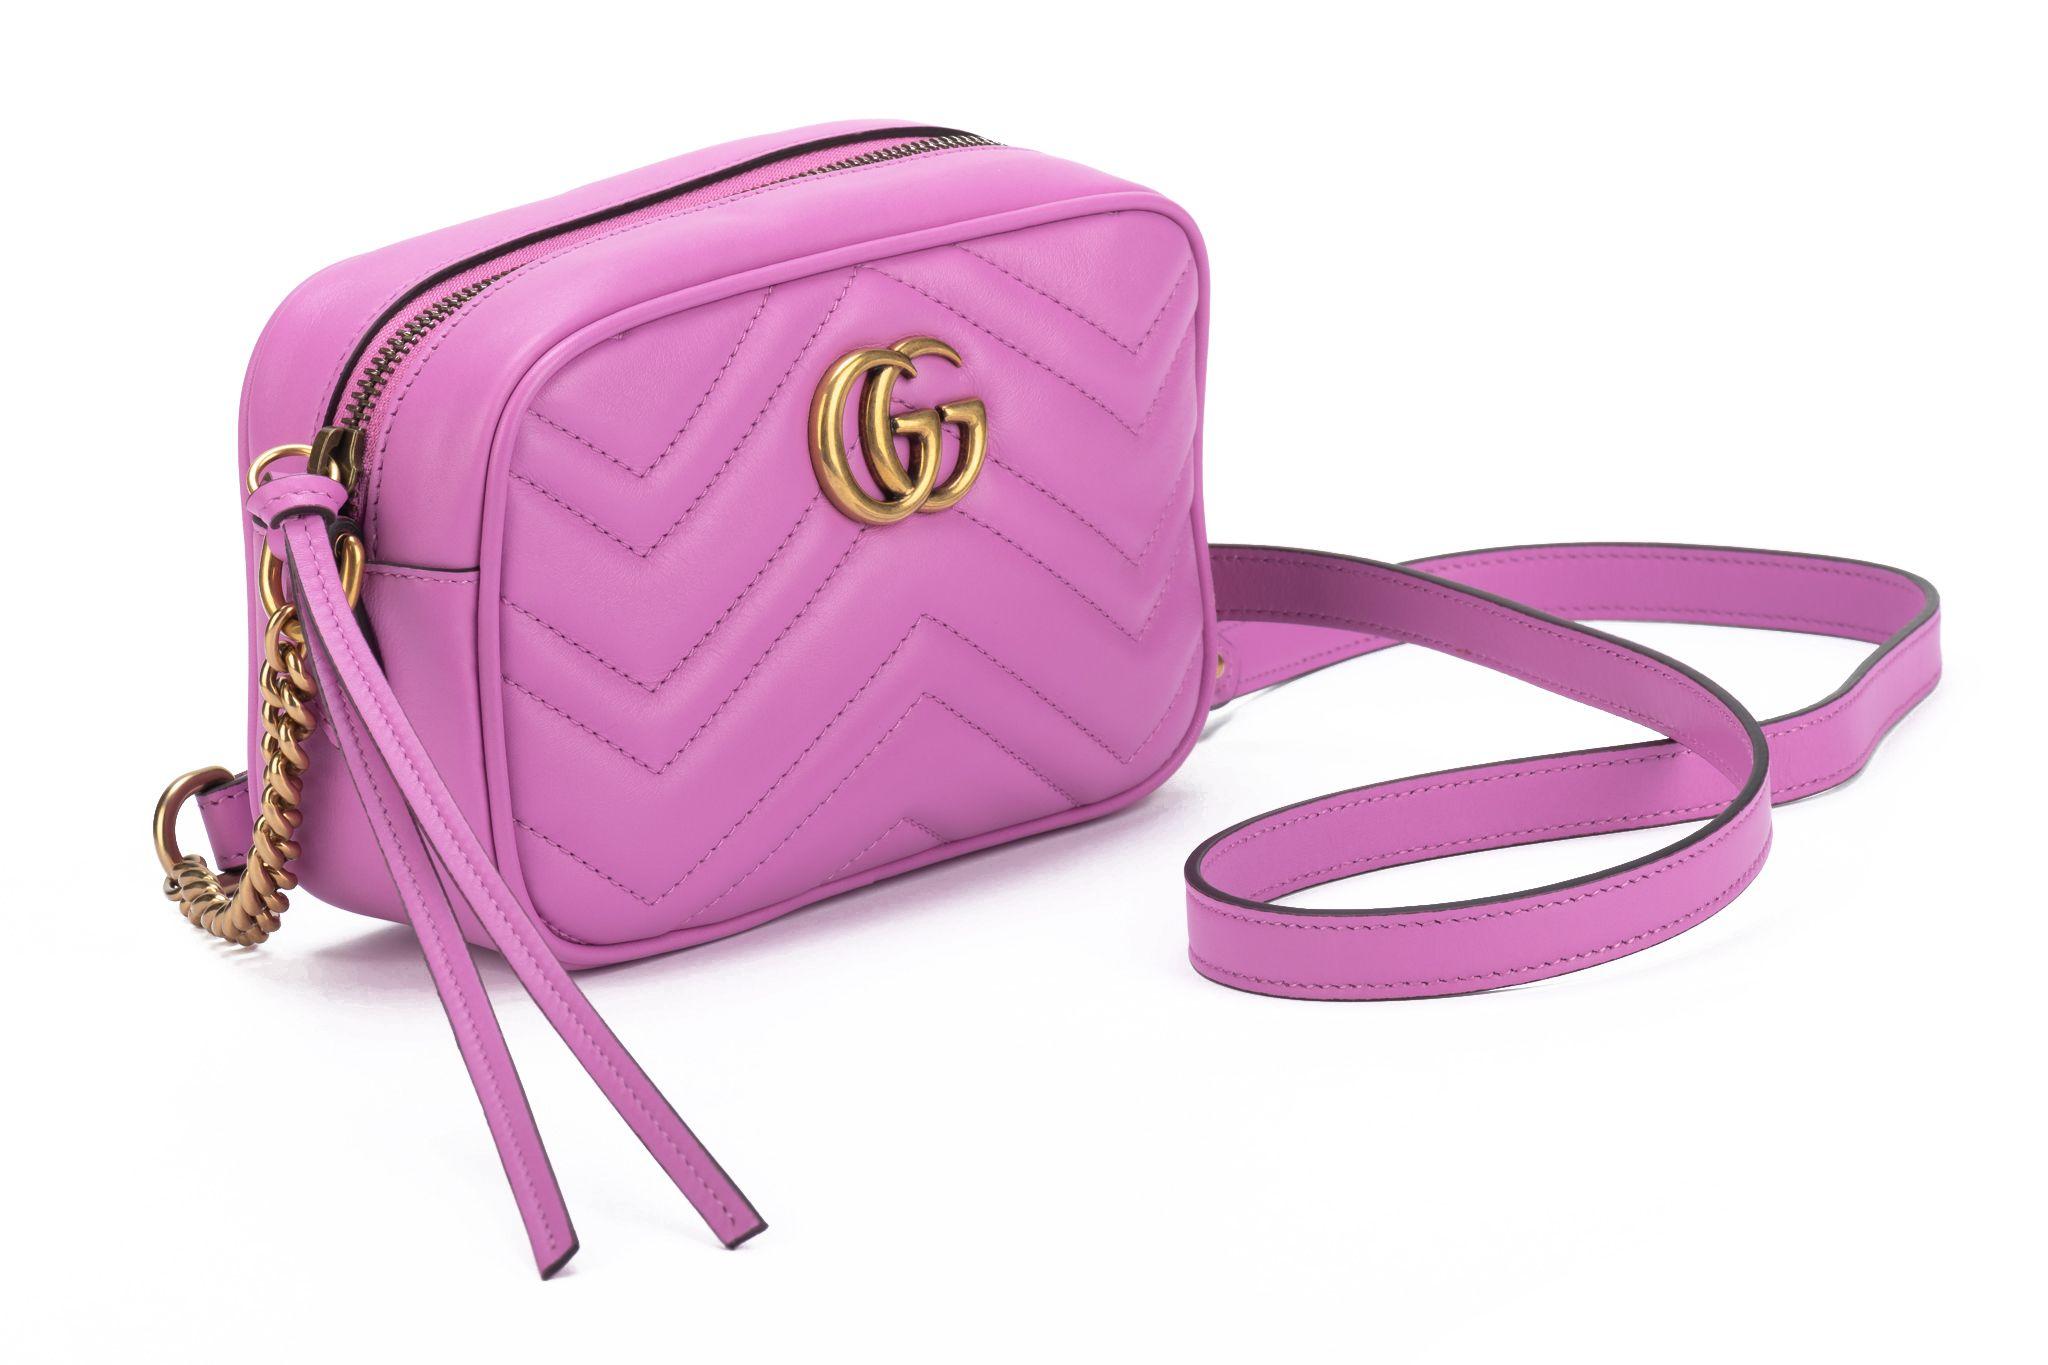 Gucci new lilac leather small Marmont cross body bag with gold tone hardware. Adjustable shoulder strap, drop 23”. Comes with booklet and original dust cover.